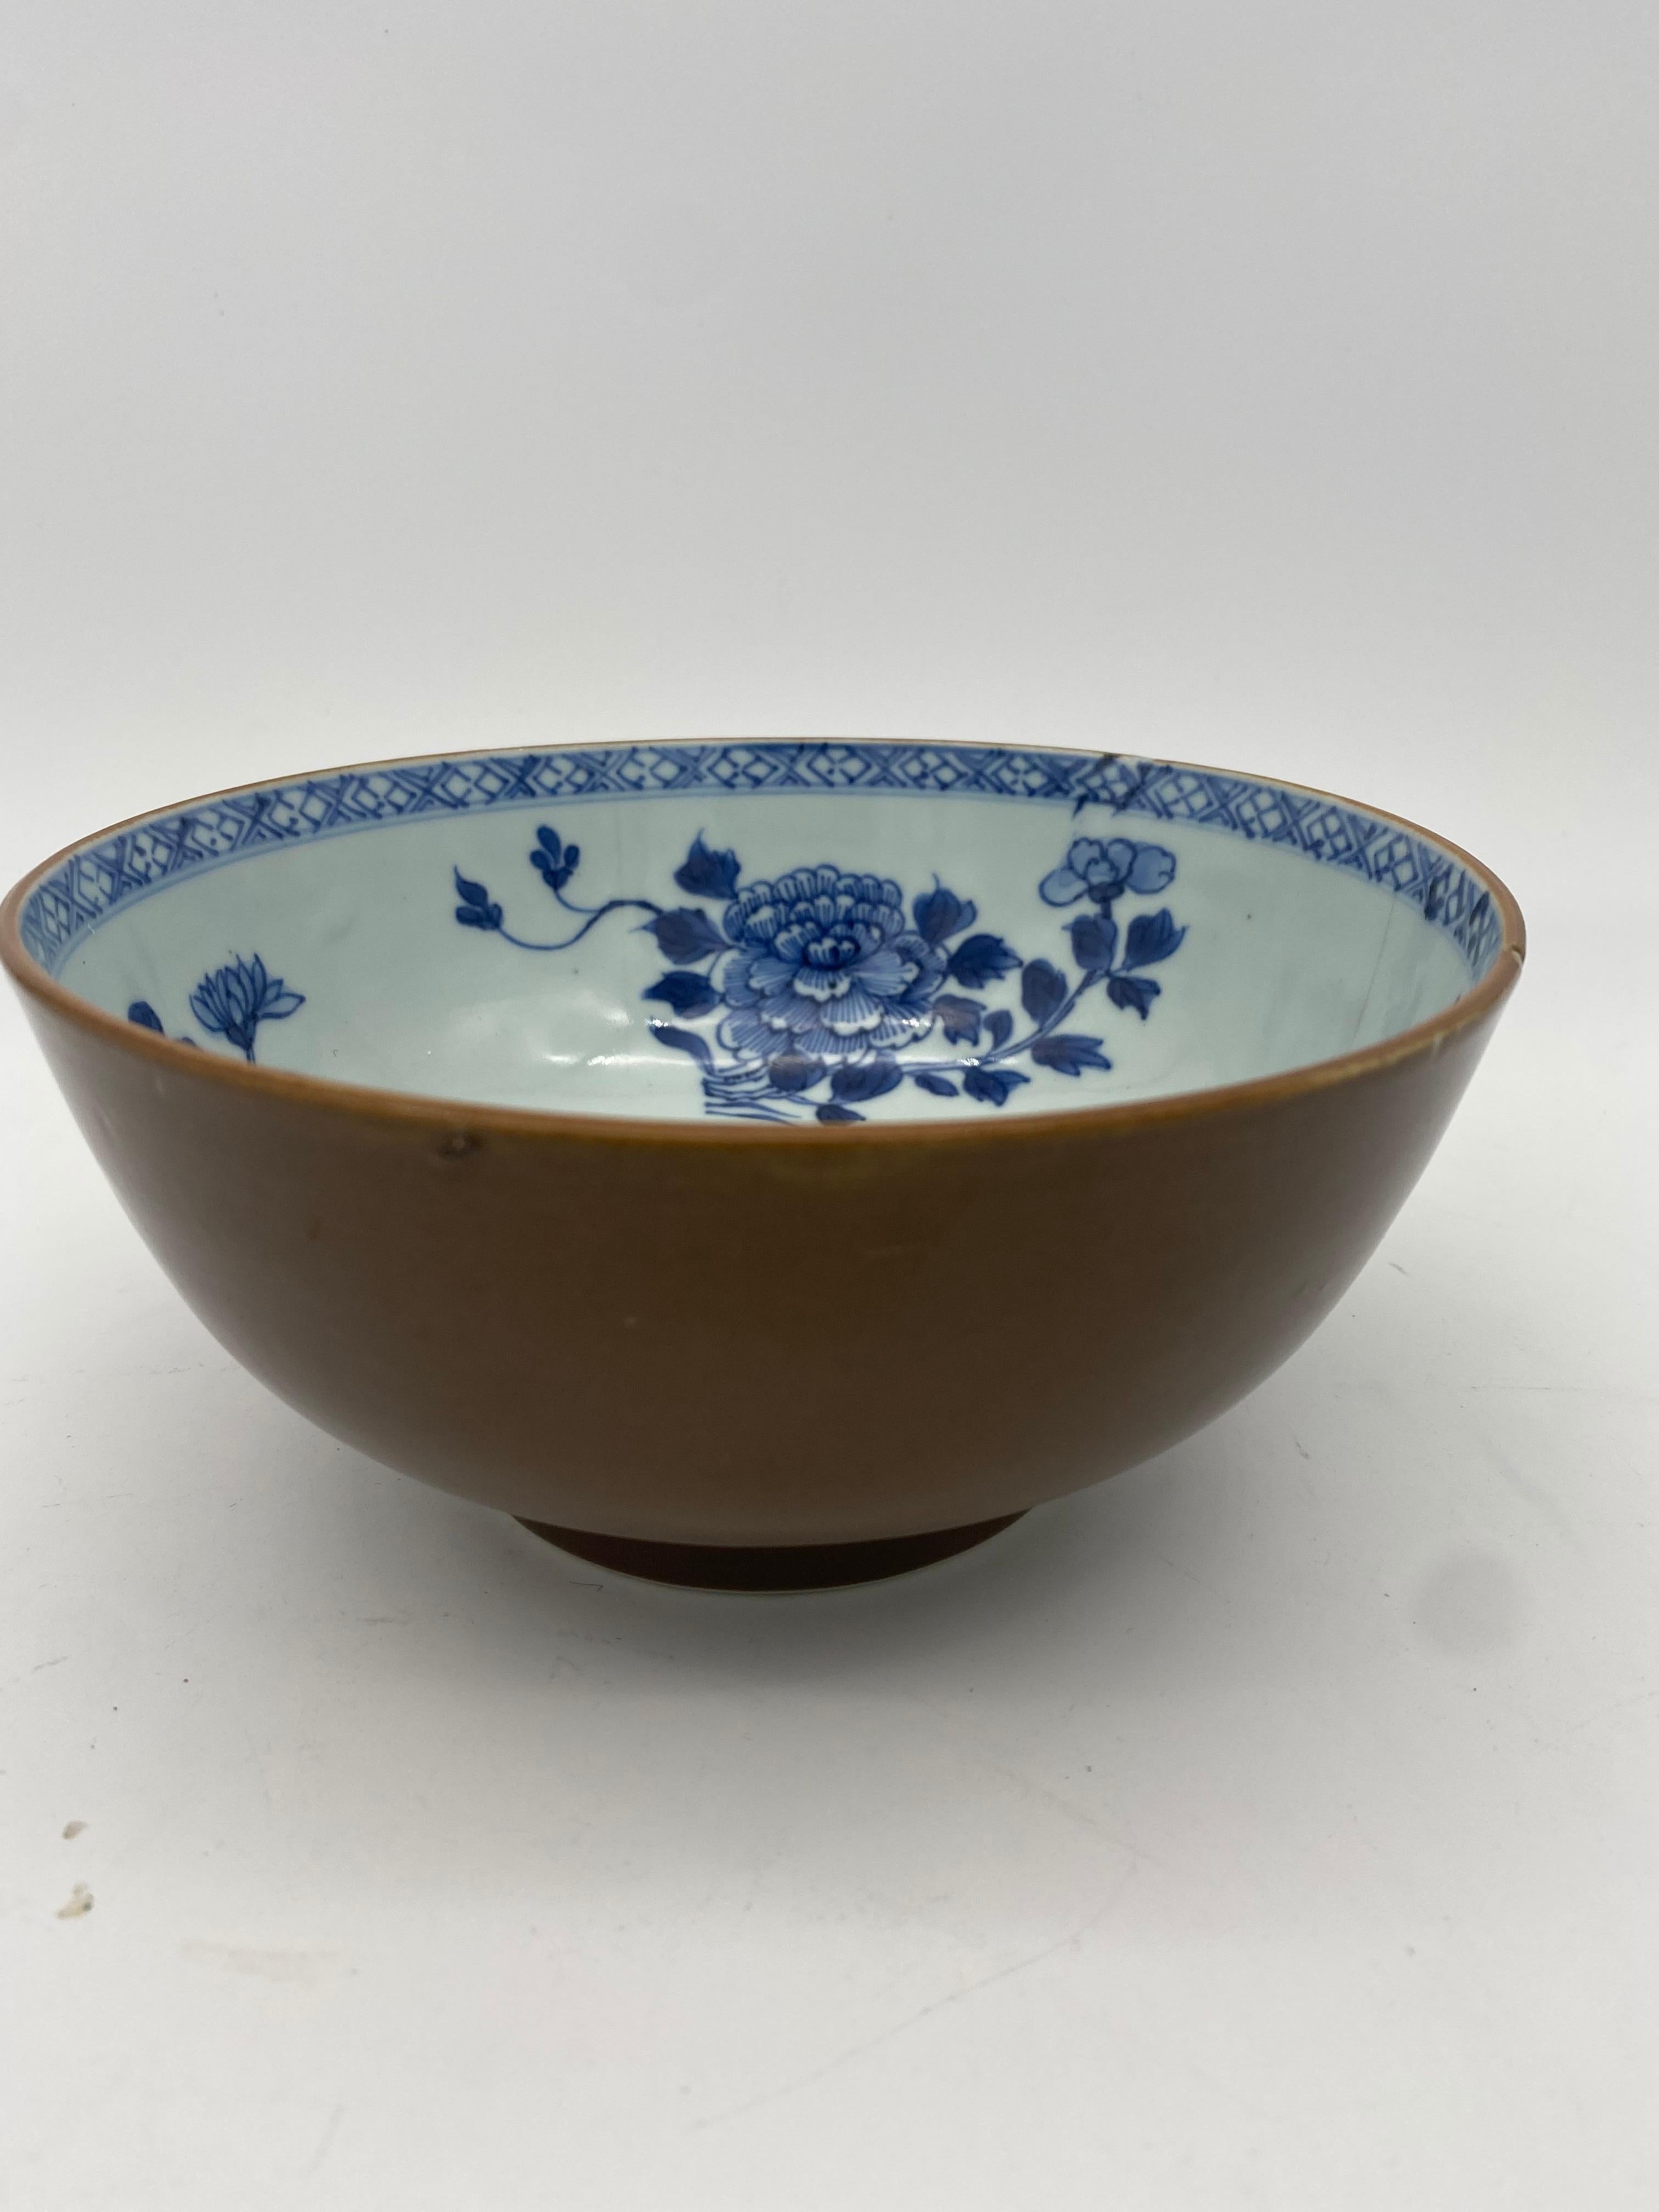 An 18th century Chinese Nanking cargo blue and white and cafe -au-lait porcelain bowl, decorated to the interior with sprays of flowers and leaves, with a continuous cross hatch design to the rim, small crack rim ,with lot label for Nanking cargo,